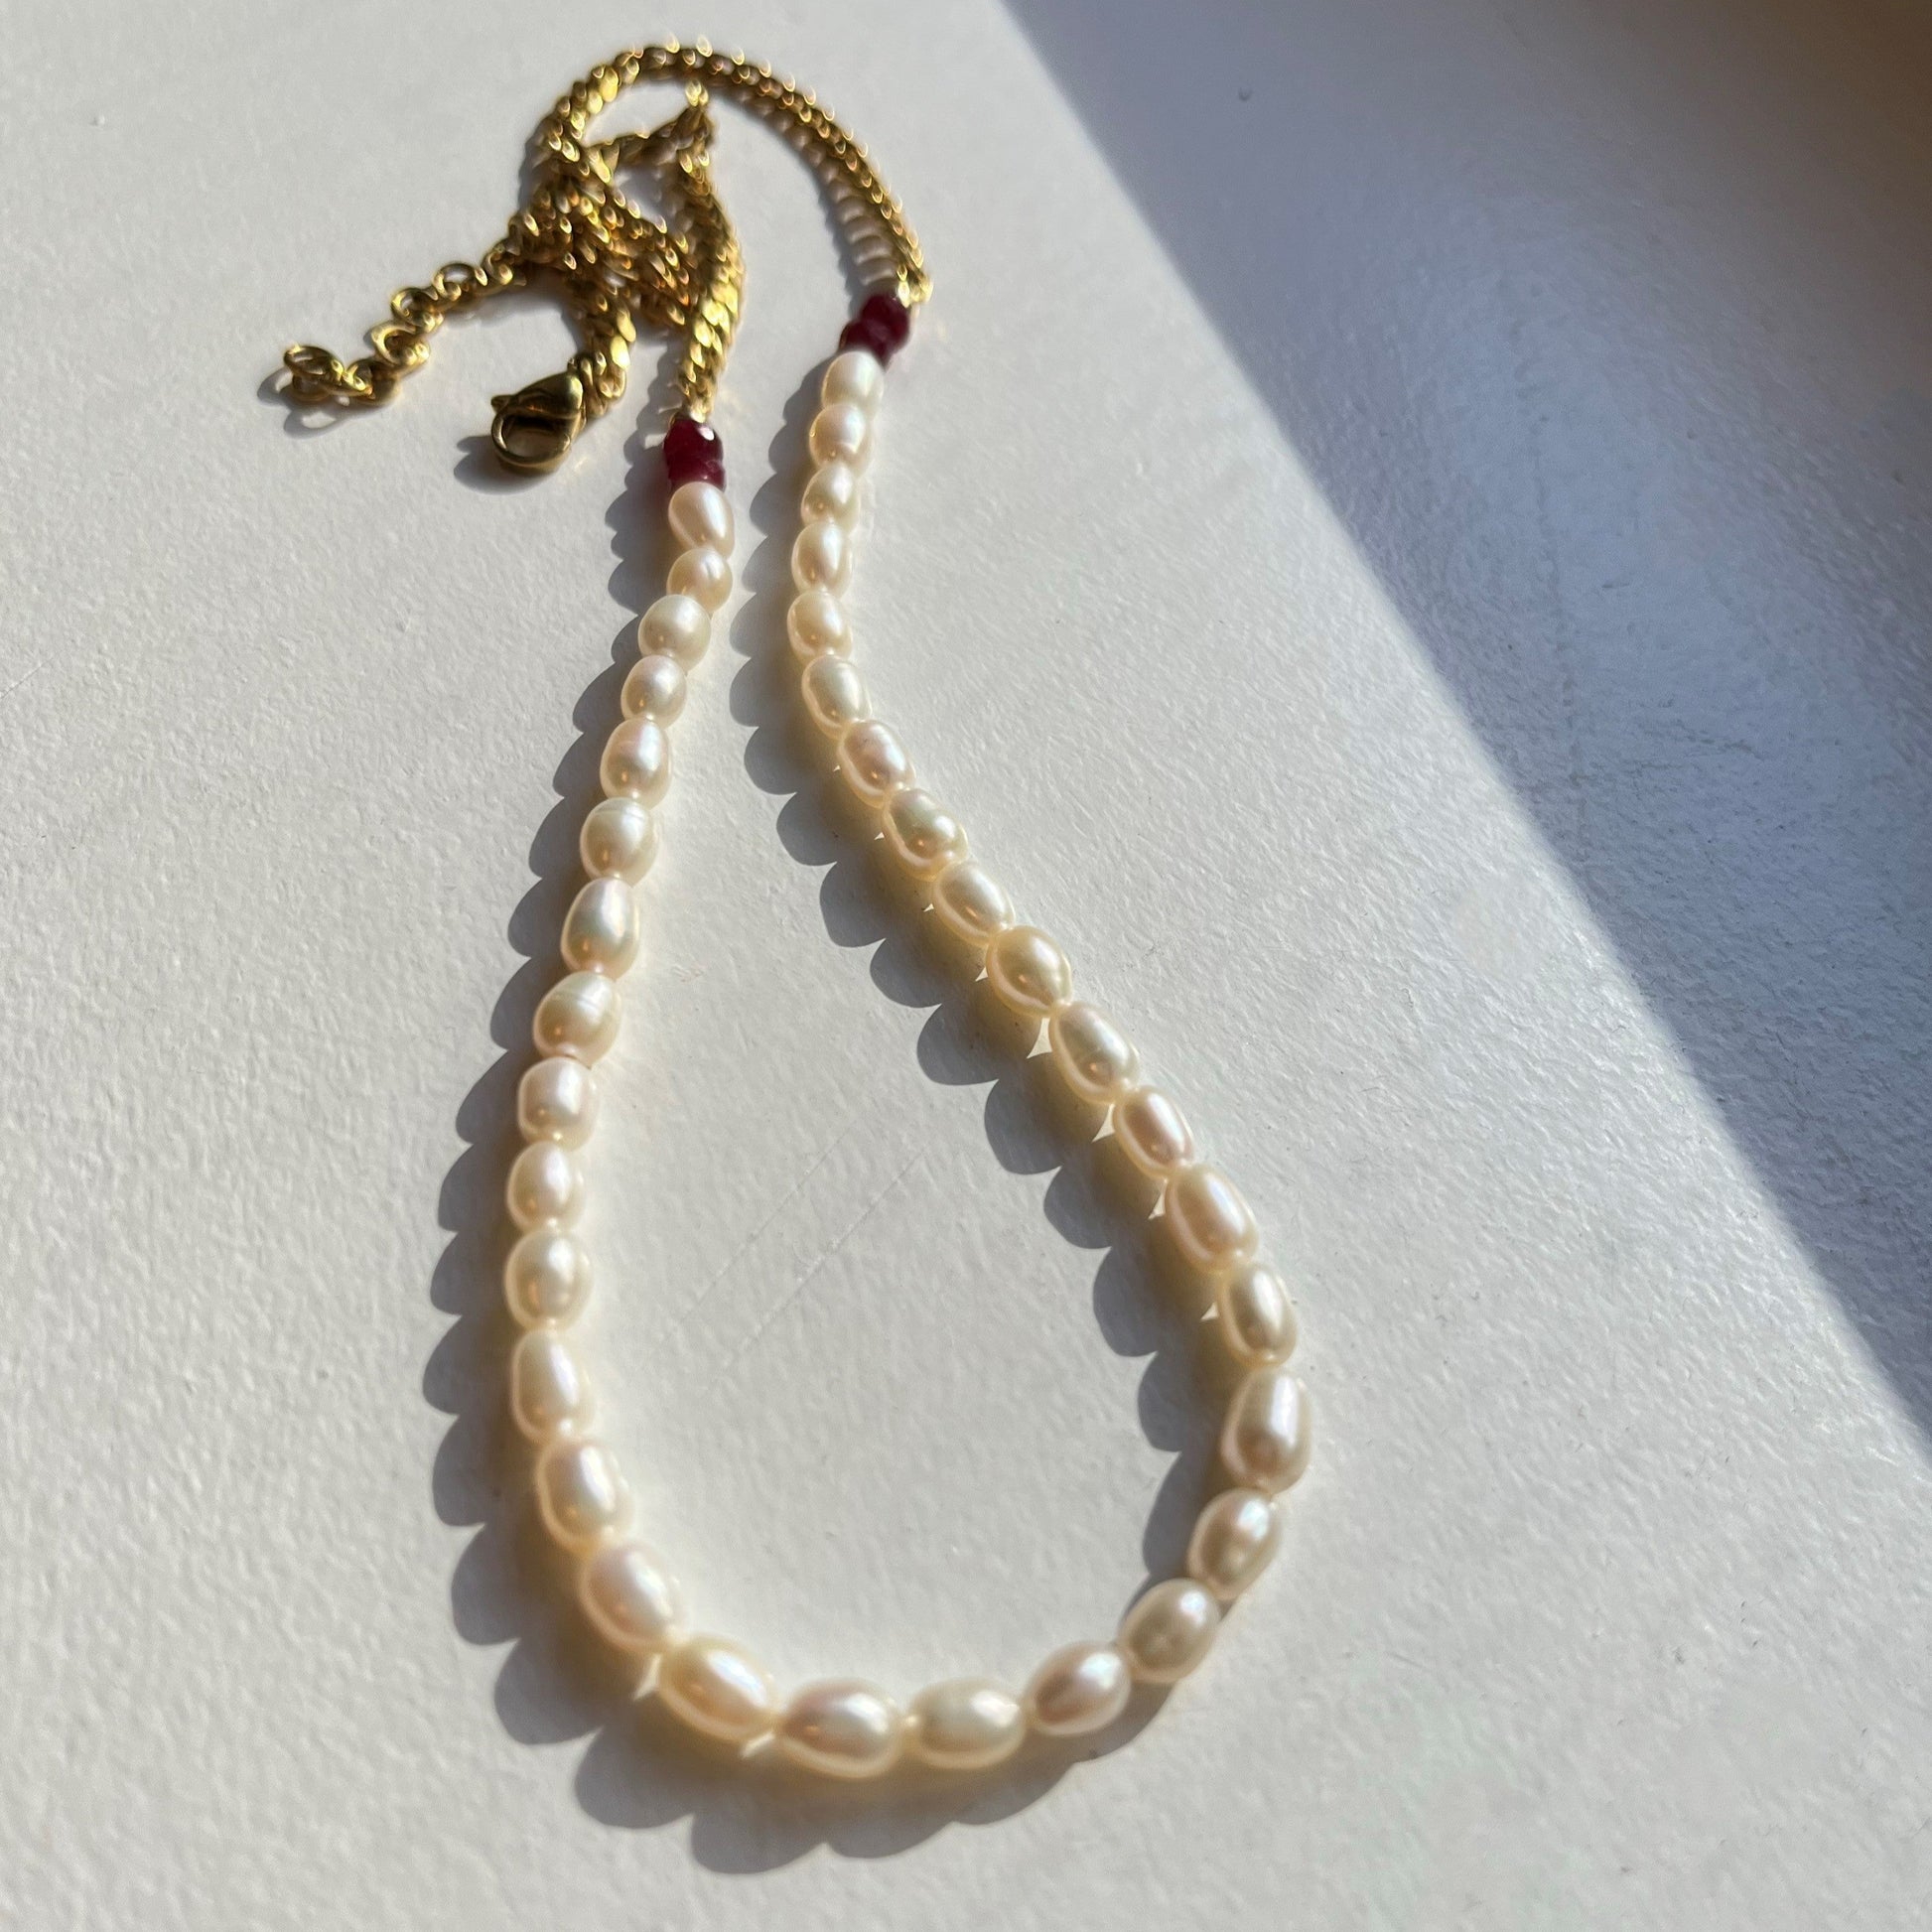 Concha Mini - Seed pearls with semi precious gem beads and chains. 